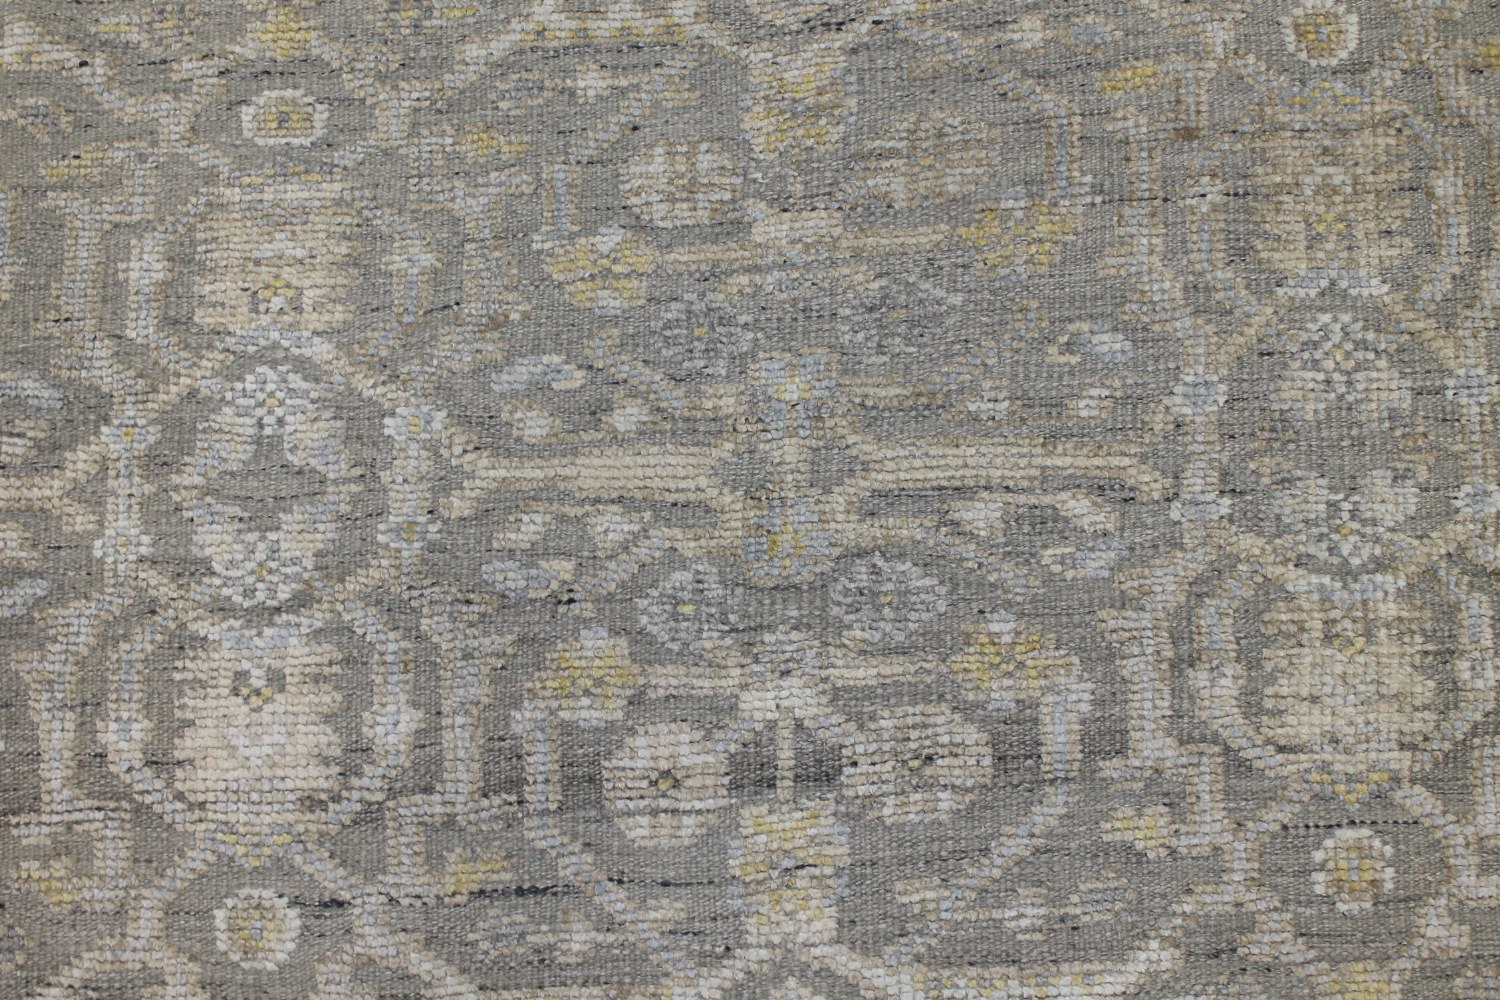 6x9 Oushak Hand Knotted Wool & Viscose Area Rug - MR023503